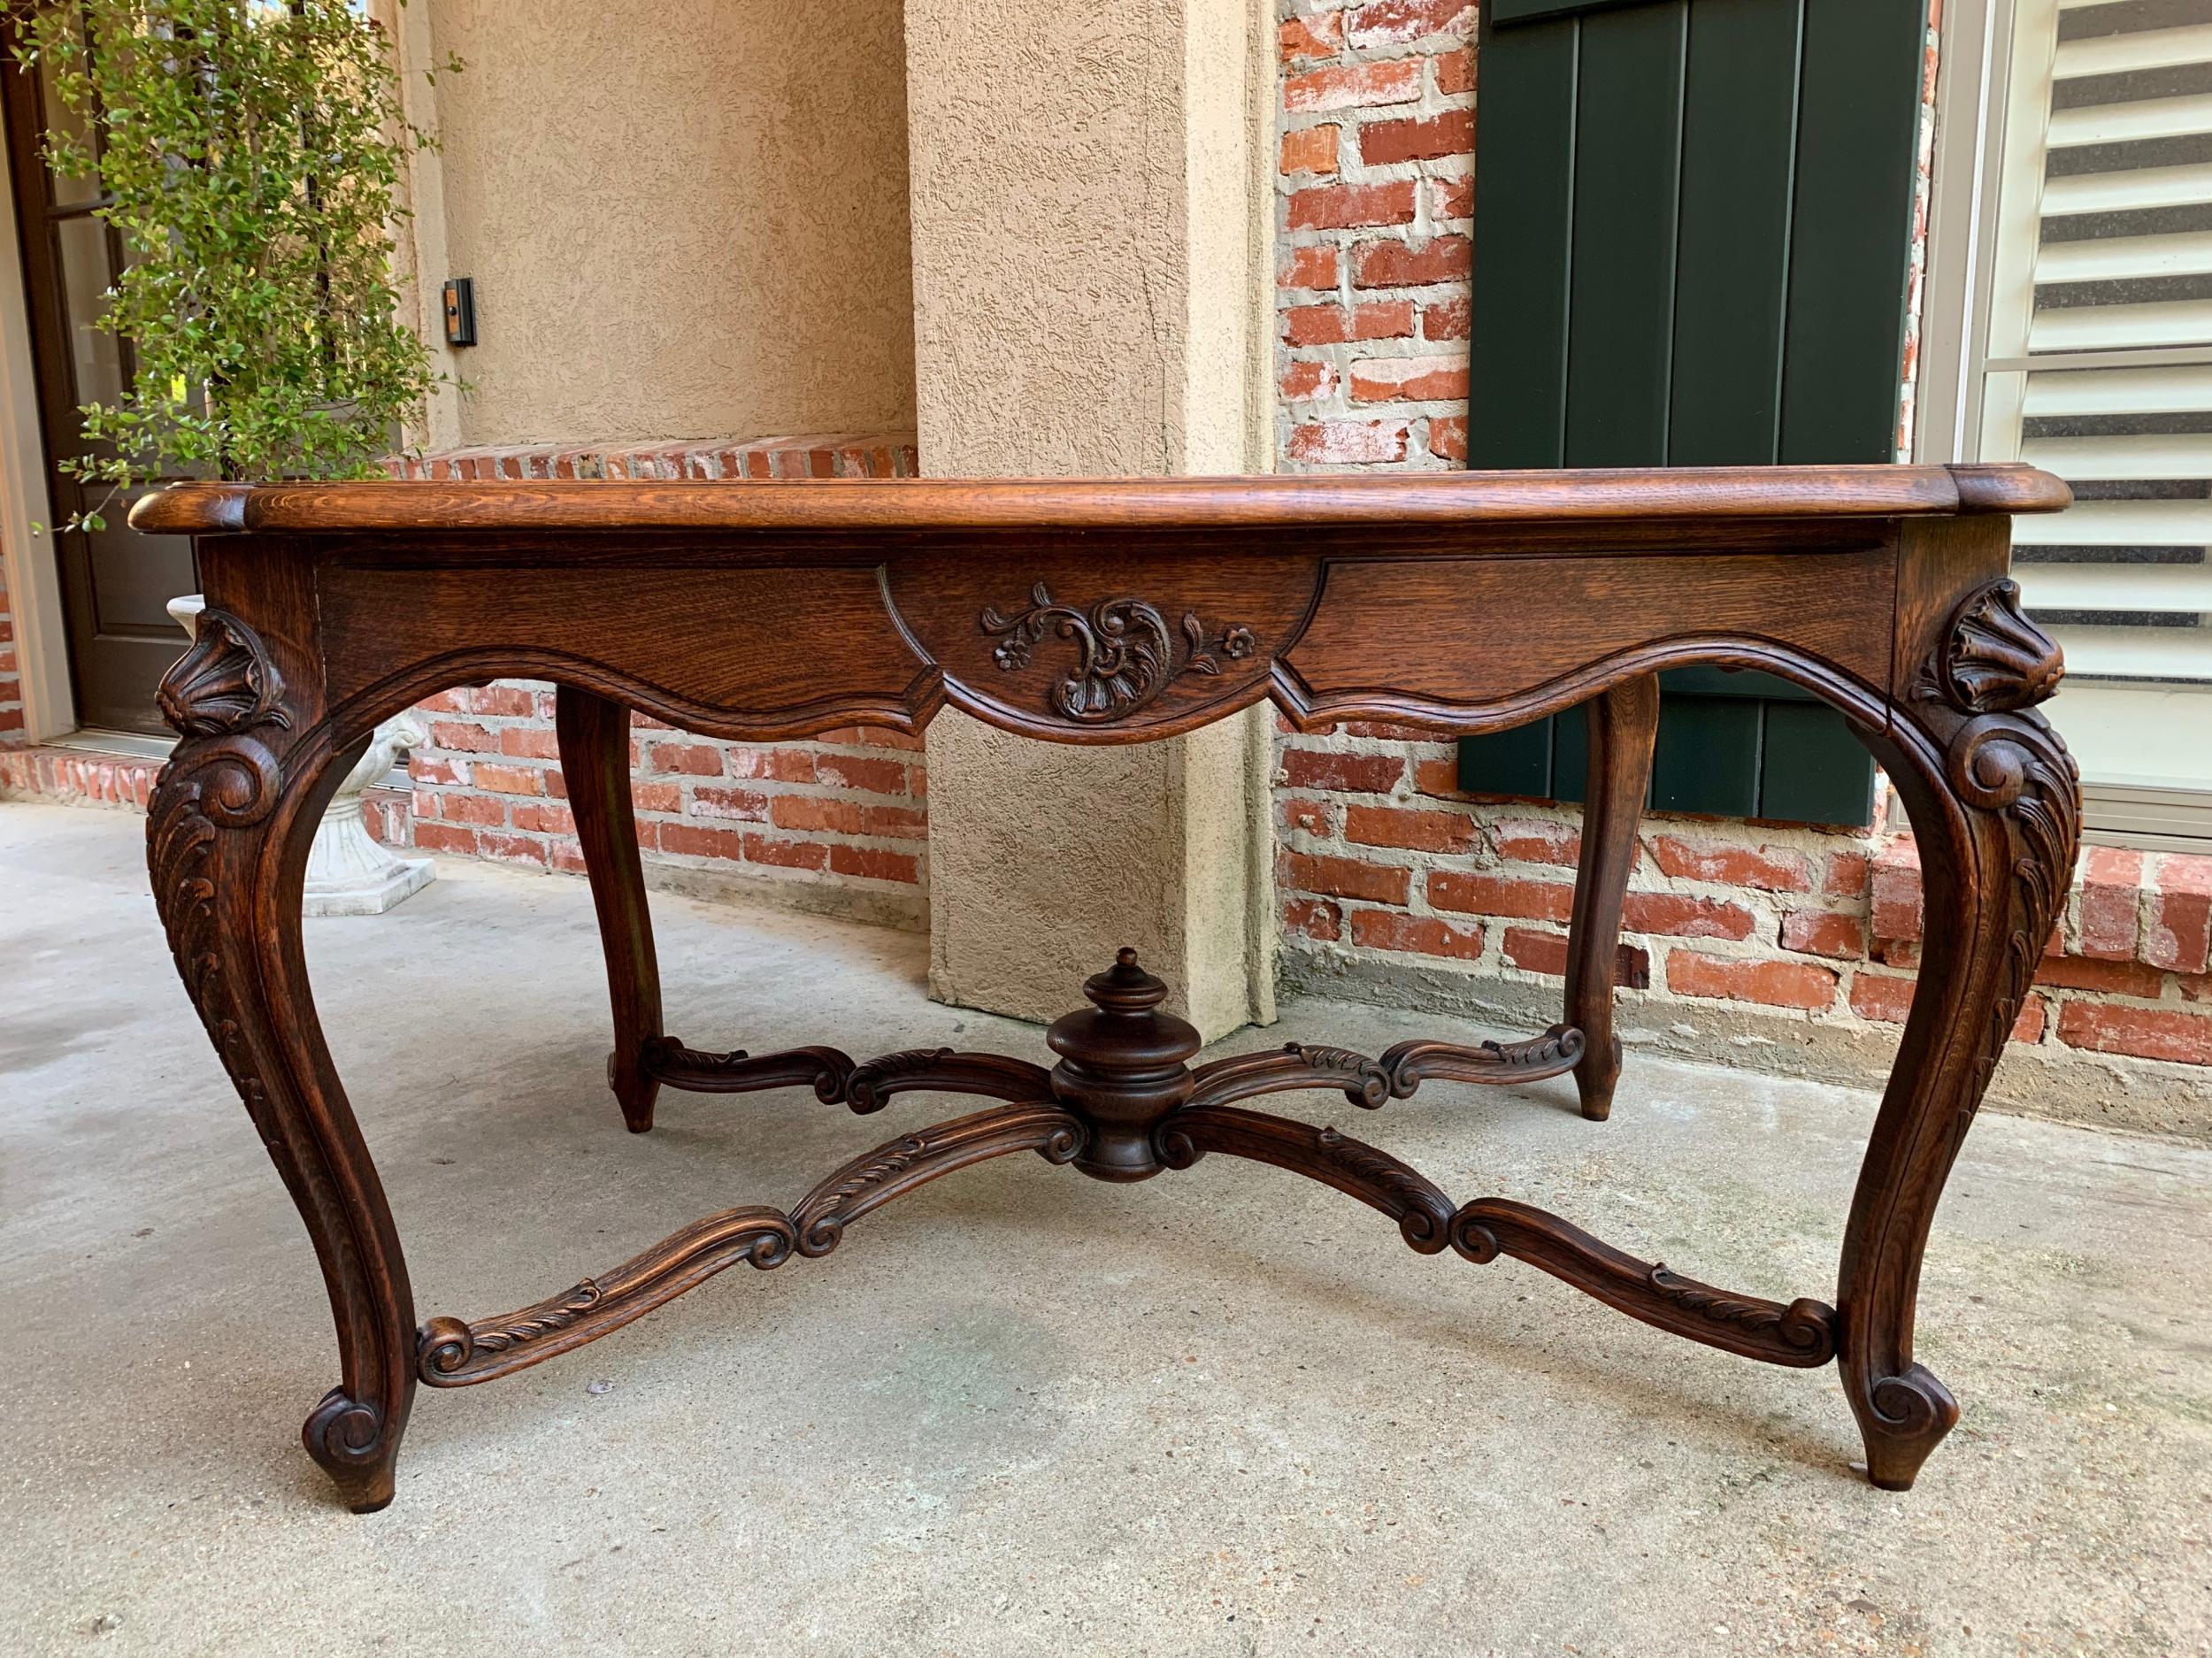 Antique French carved oak parquet dining table kitchen library Louis XV style

~Direct from France~
~Lovely antique French carved oak dining table with a gorgeous profile!~
~~Full parquet beveled edge serpentine oak top~
~Carved serpentine